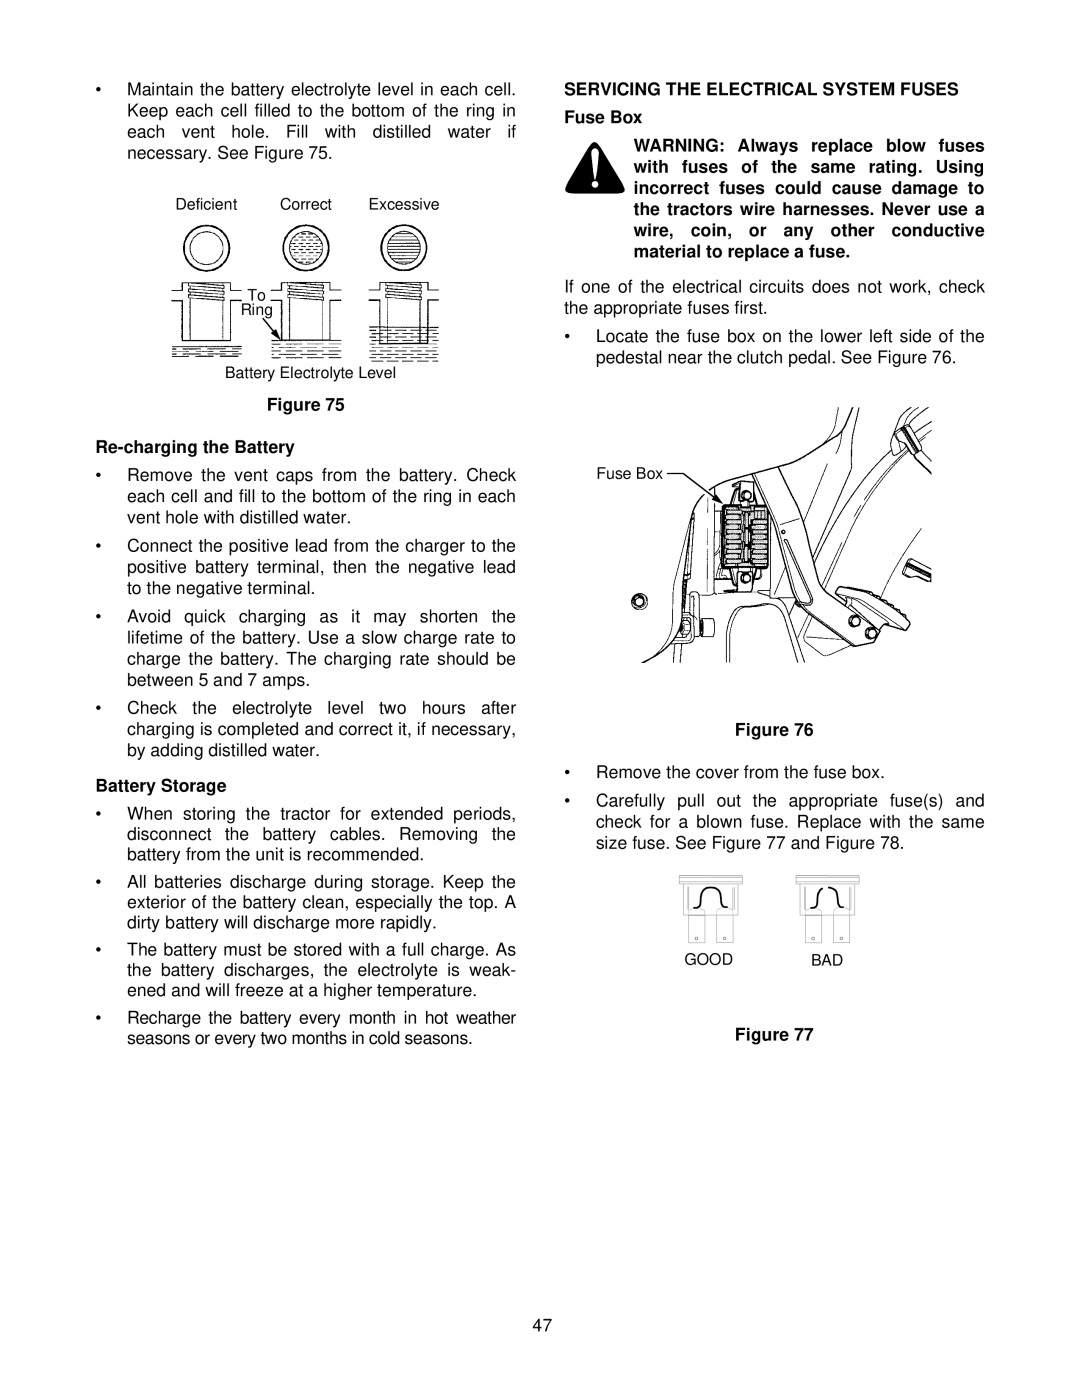 Cub Cadet 8454 manual Re-charging the Battery, Battery Storage, Servicing the Electrical System Fuses, Fuse Box 